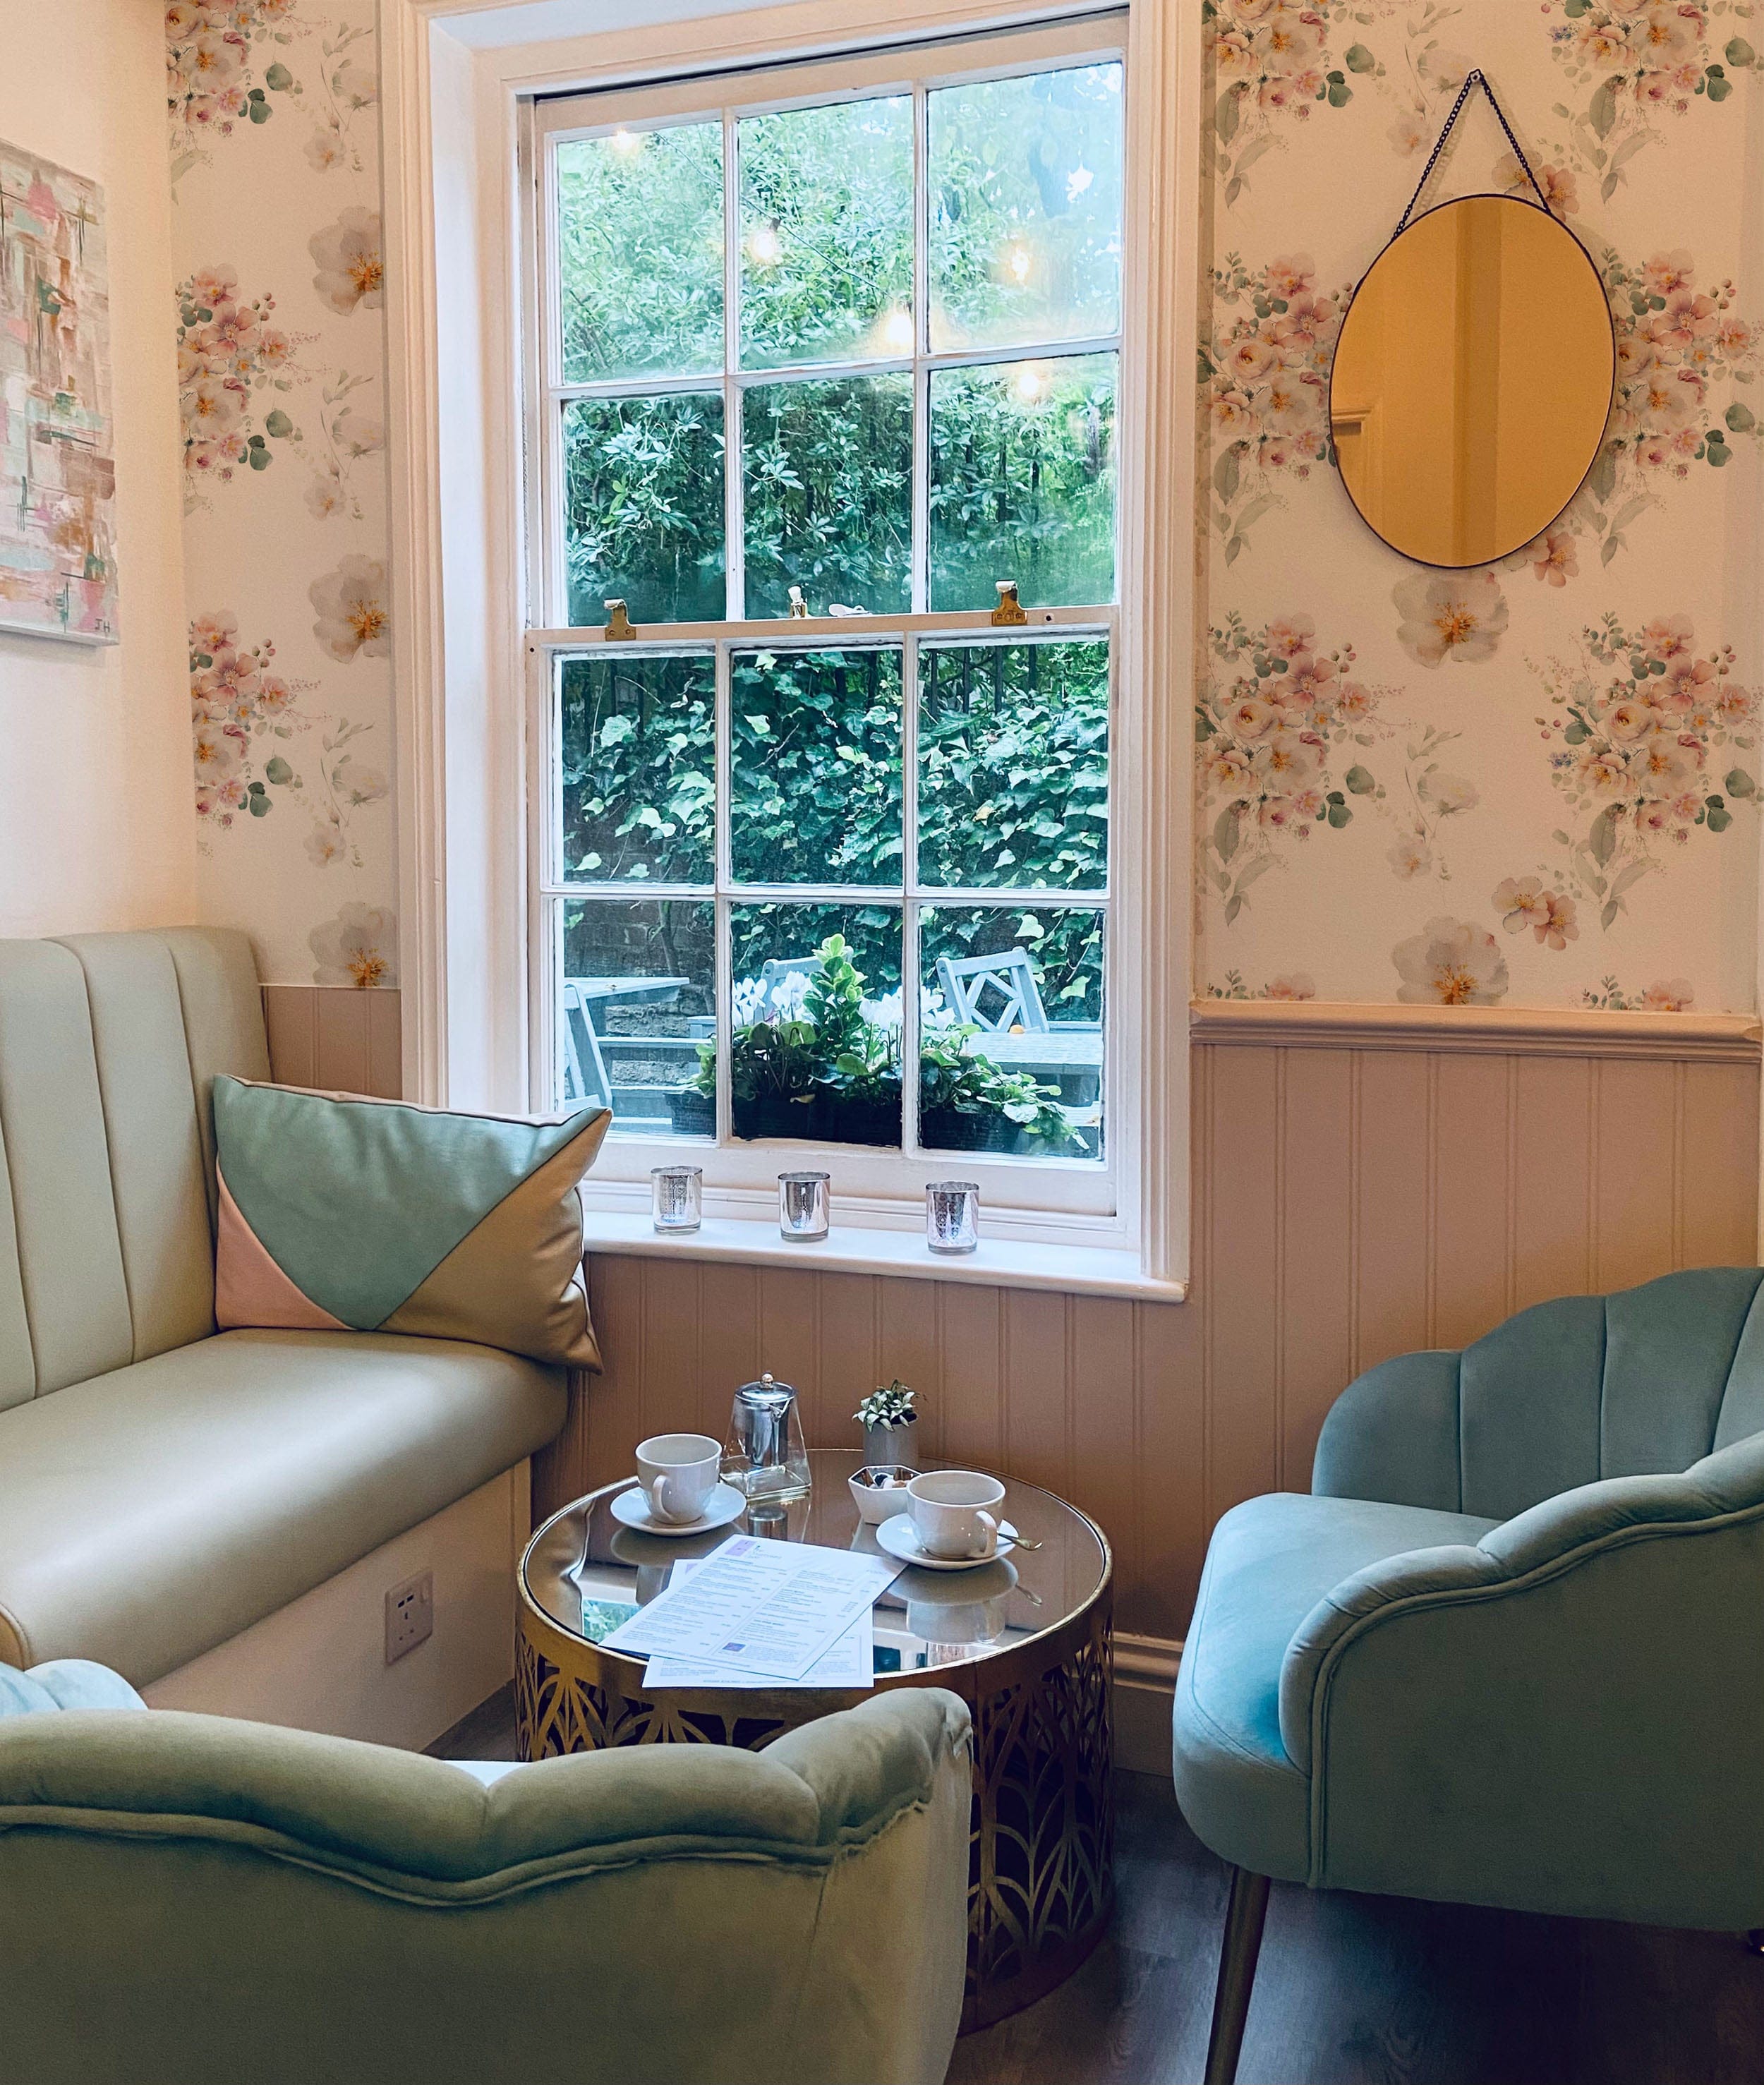 A charming seating area with pastel green chairs and a small round table, complemented by Wild Flora Wallpaper. The floral pattern adds a touch of elegance and tranquility to the room, making it a perfect spot for enjoying a cup of tea and conversation with friends.